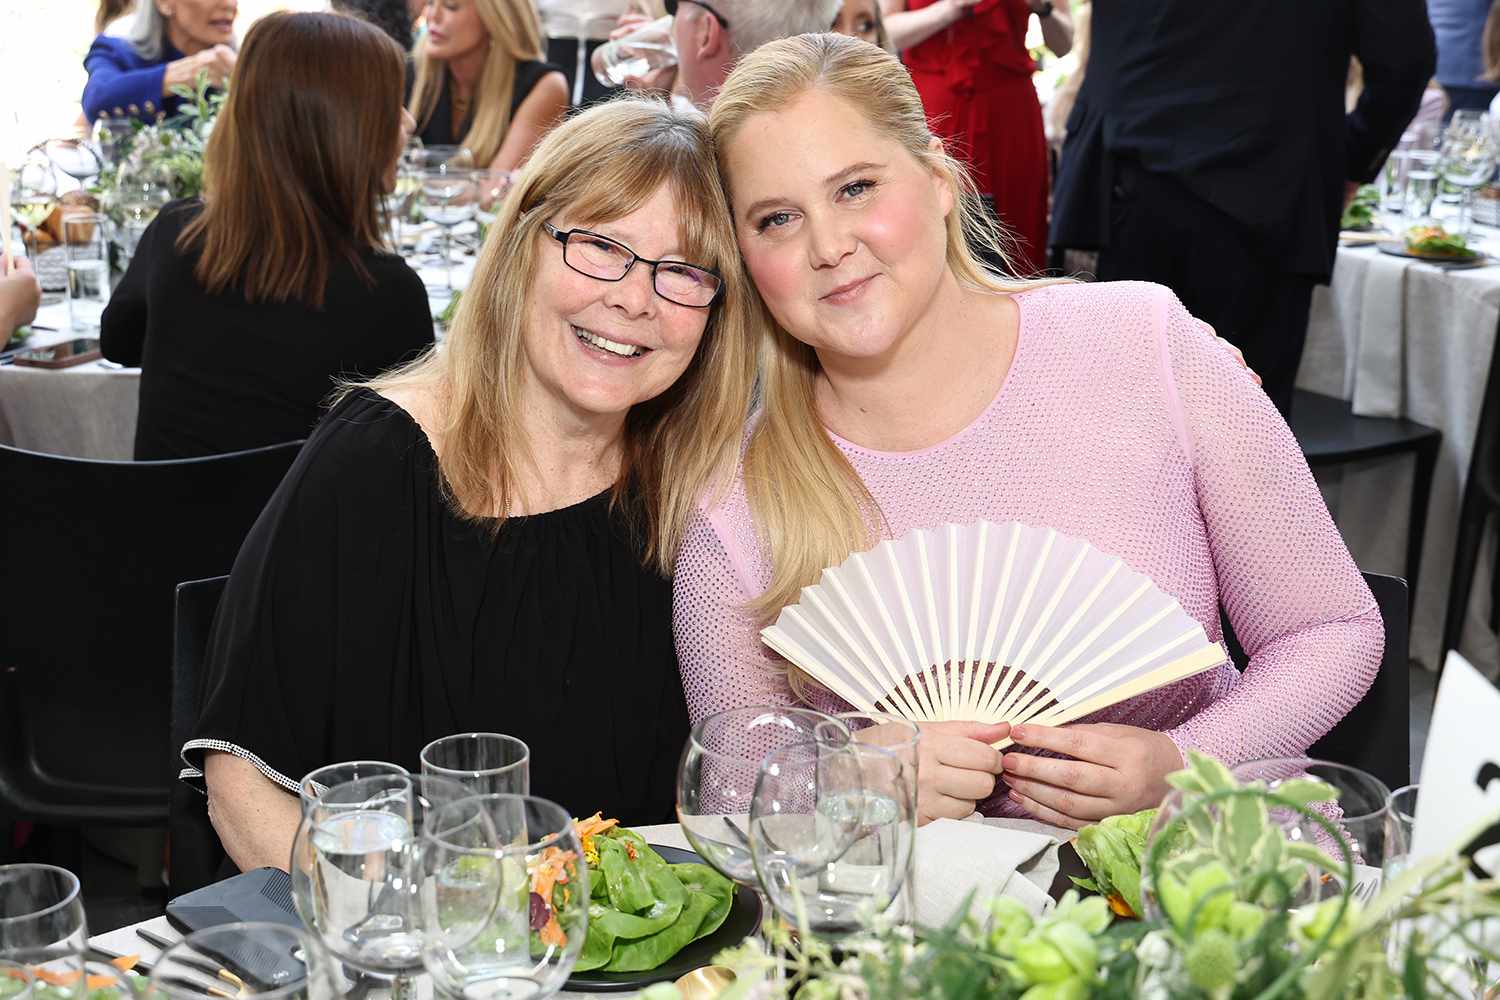 How Amy Schumer Grew to Understand Her 'Loving' Yet 'Narcissistic' Mom: 'I See All the Same Things in Myself'